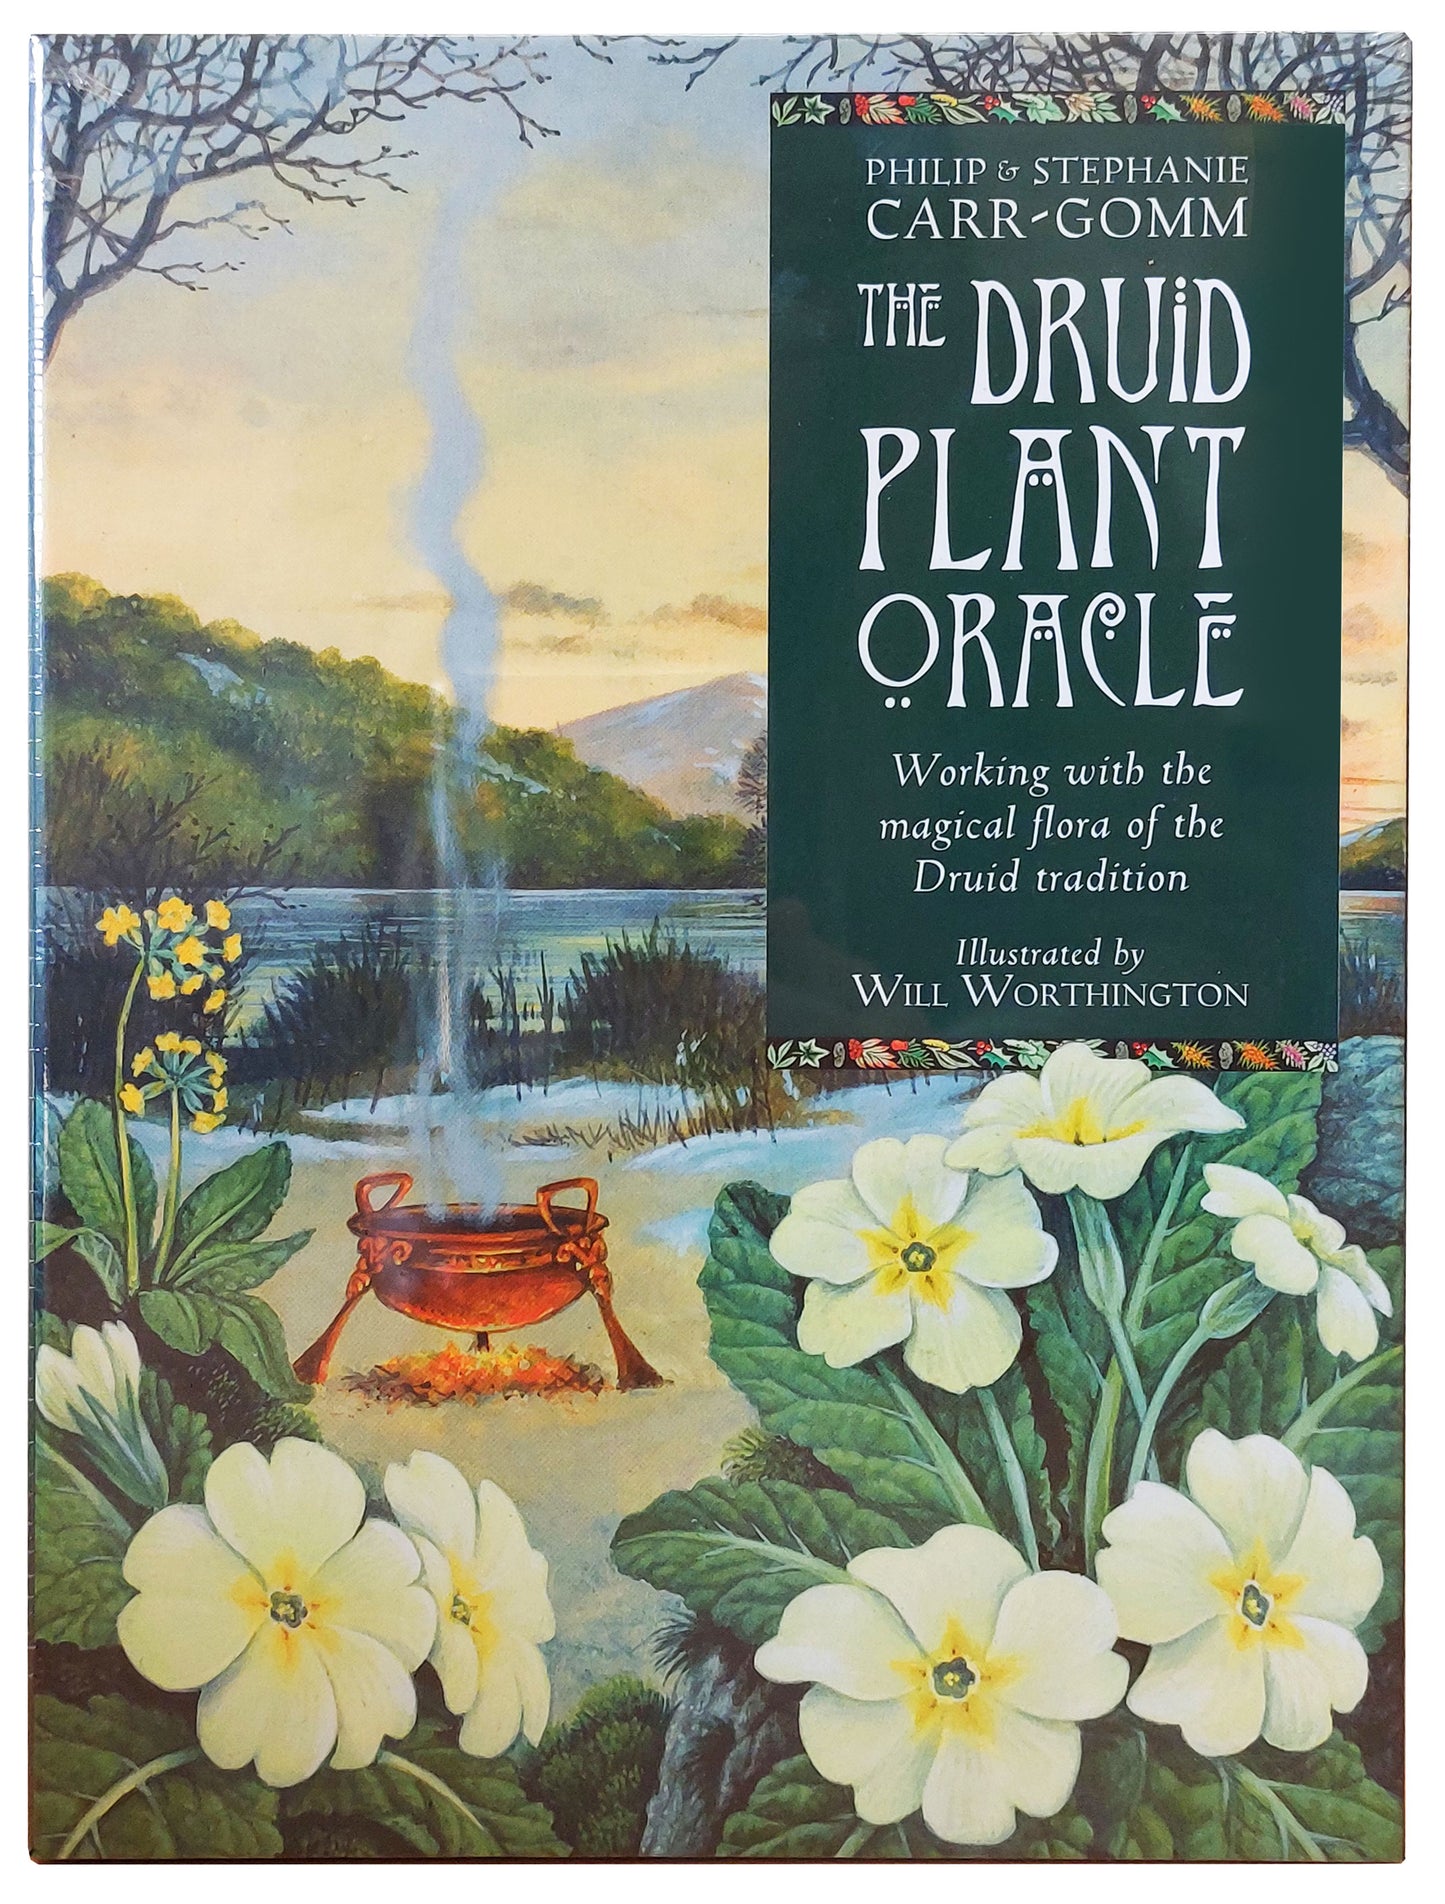 The Druid Plant Oracle - Philip and Stephanie Carr-Gomm